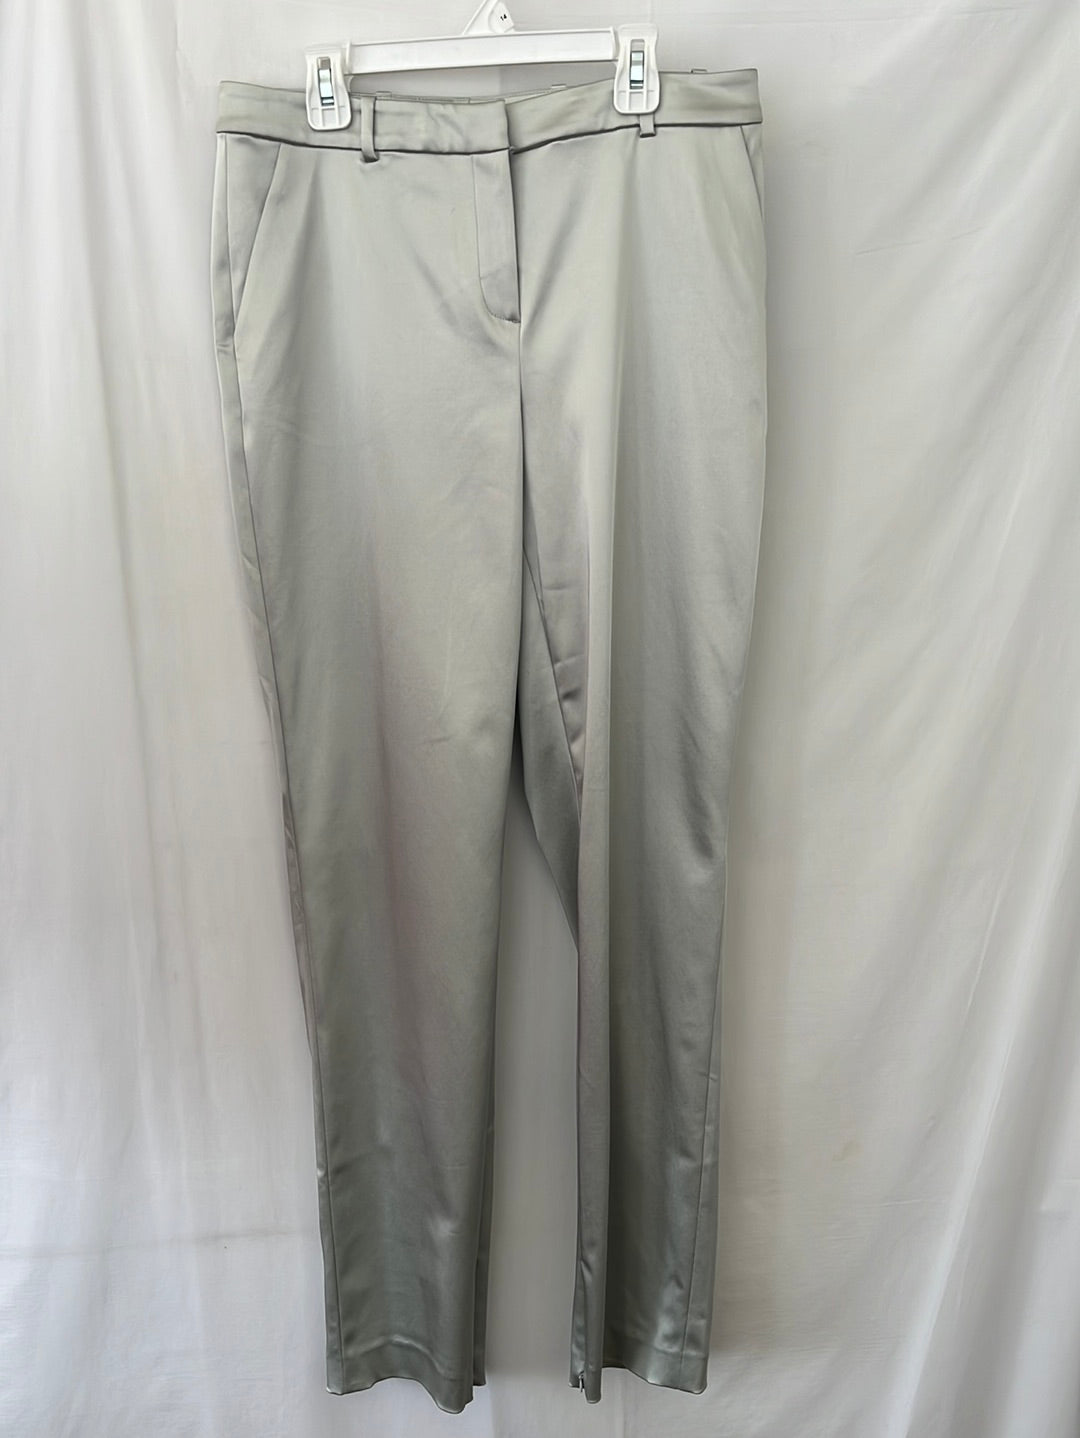 NWT -- ST. JOHN EVENING Platinum Dress Pants with Zip-up Ankles -- Size: 8